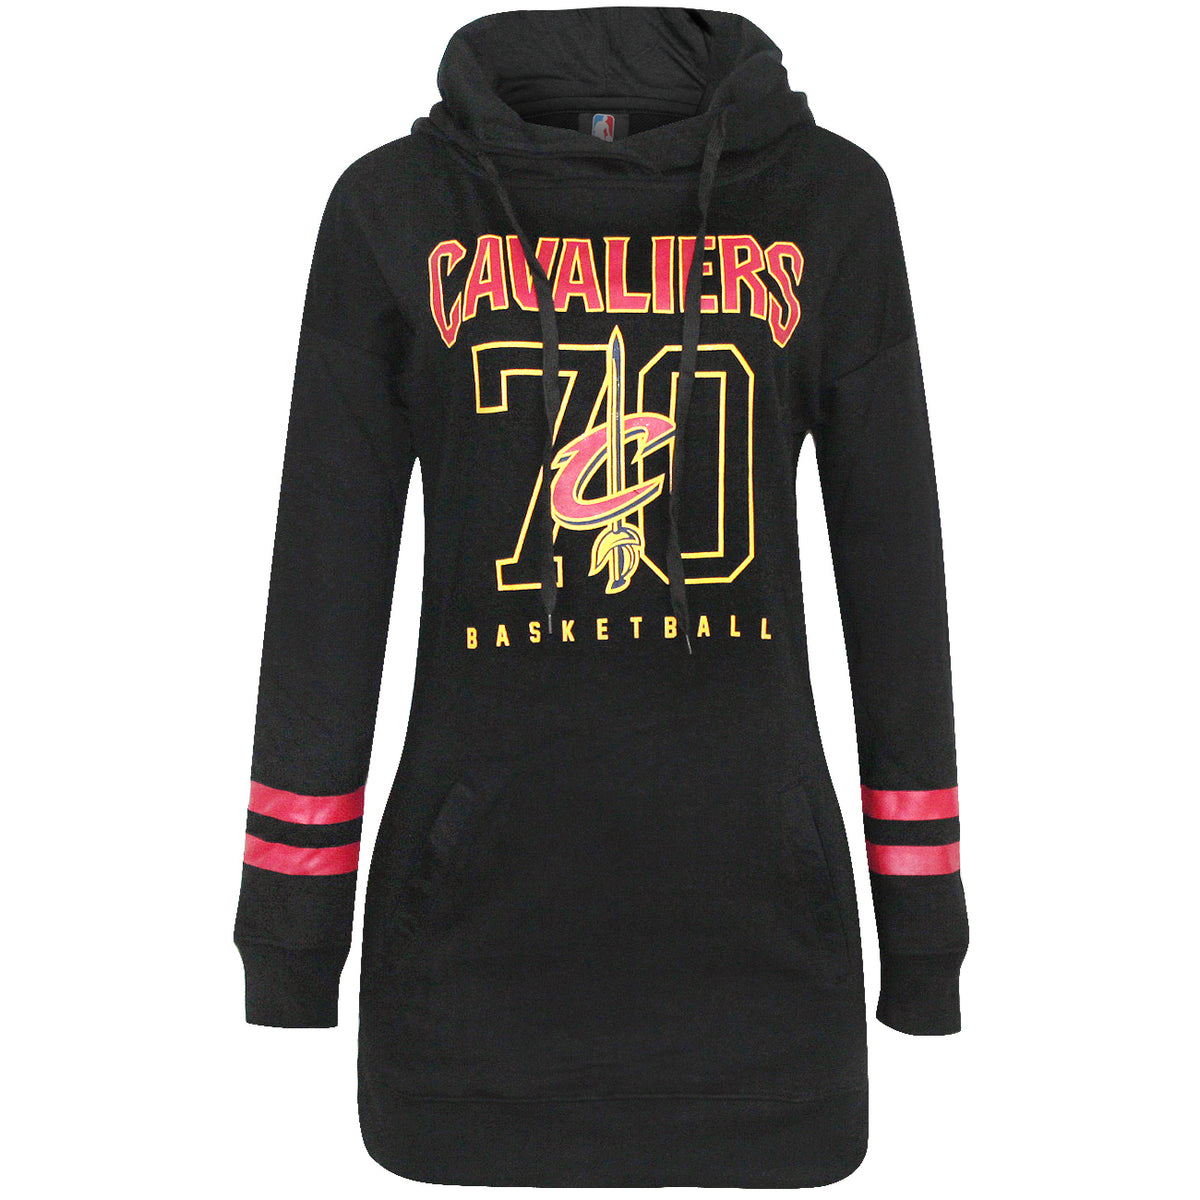 Womens Tops NBA Cleveland Cavaliers Pullover Hoodie Black